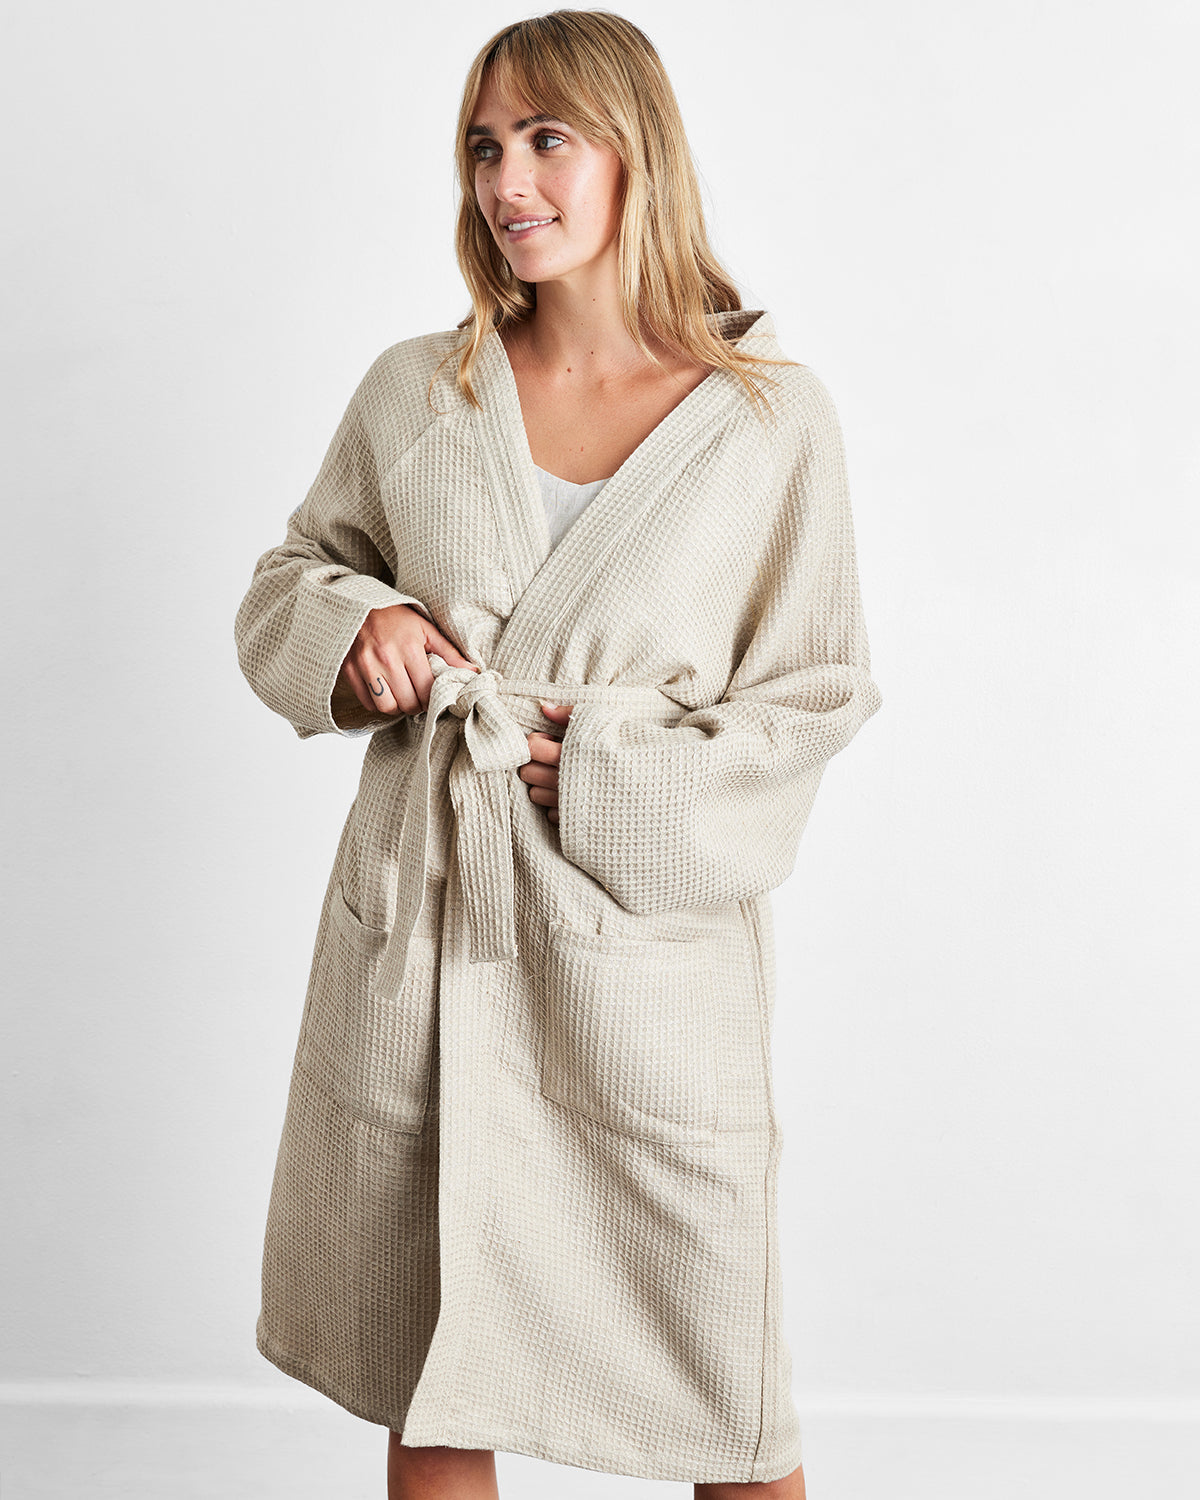 Oatmeal 100% French Flax Linen Waffle Robe – Bed Threads